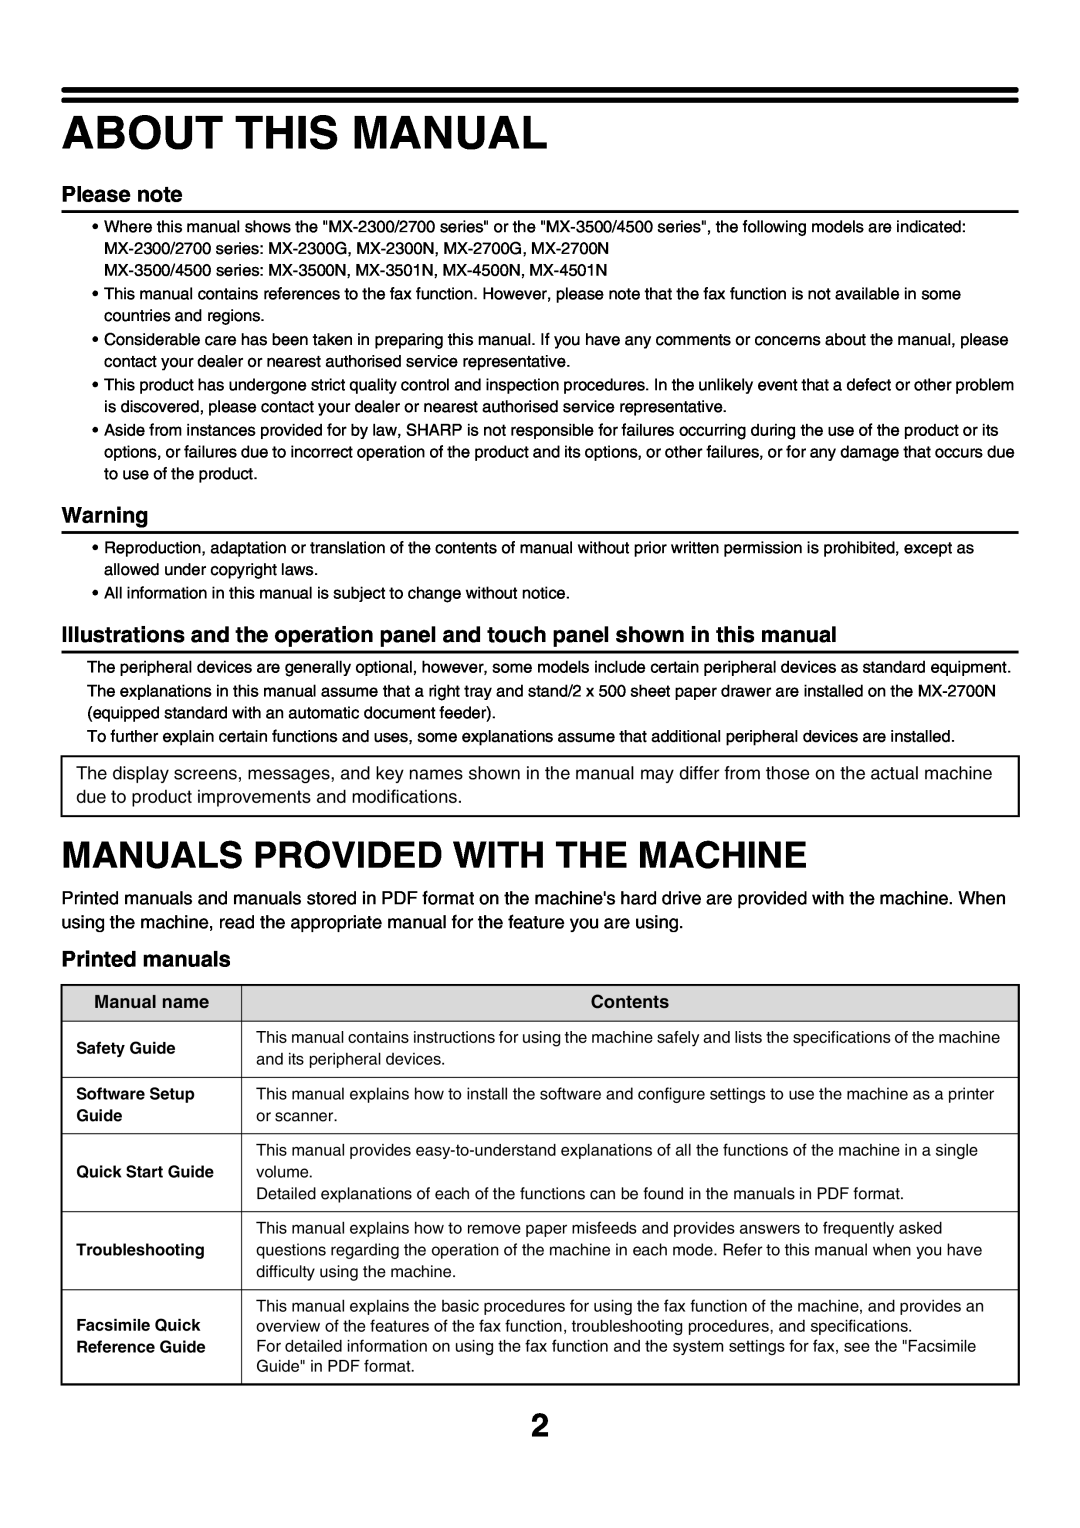 Sharp MX-3500N About This Manual, Manuals Provided With The Machine, Please note, Printed manuals, Manual name, Contents 